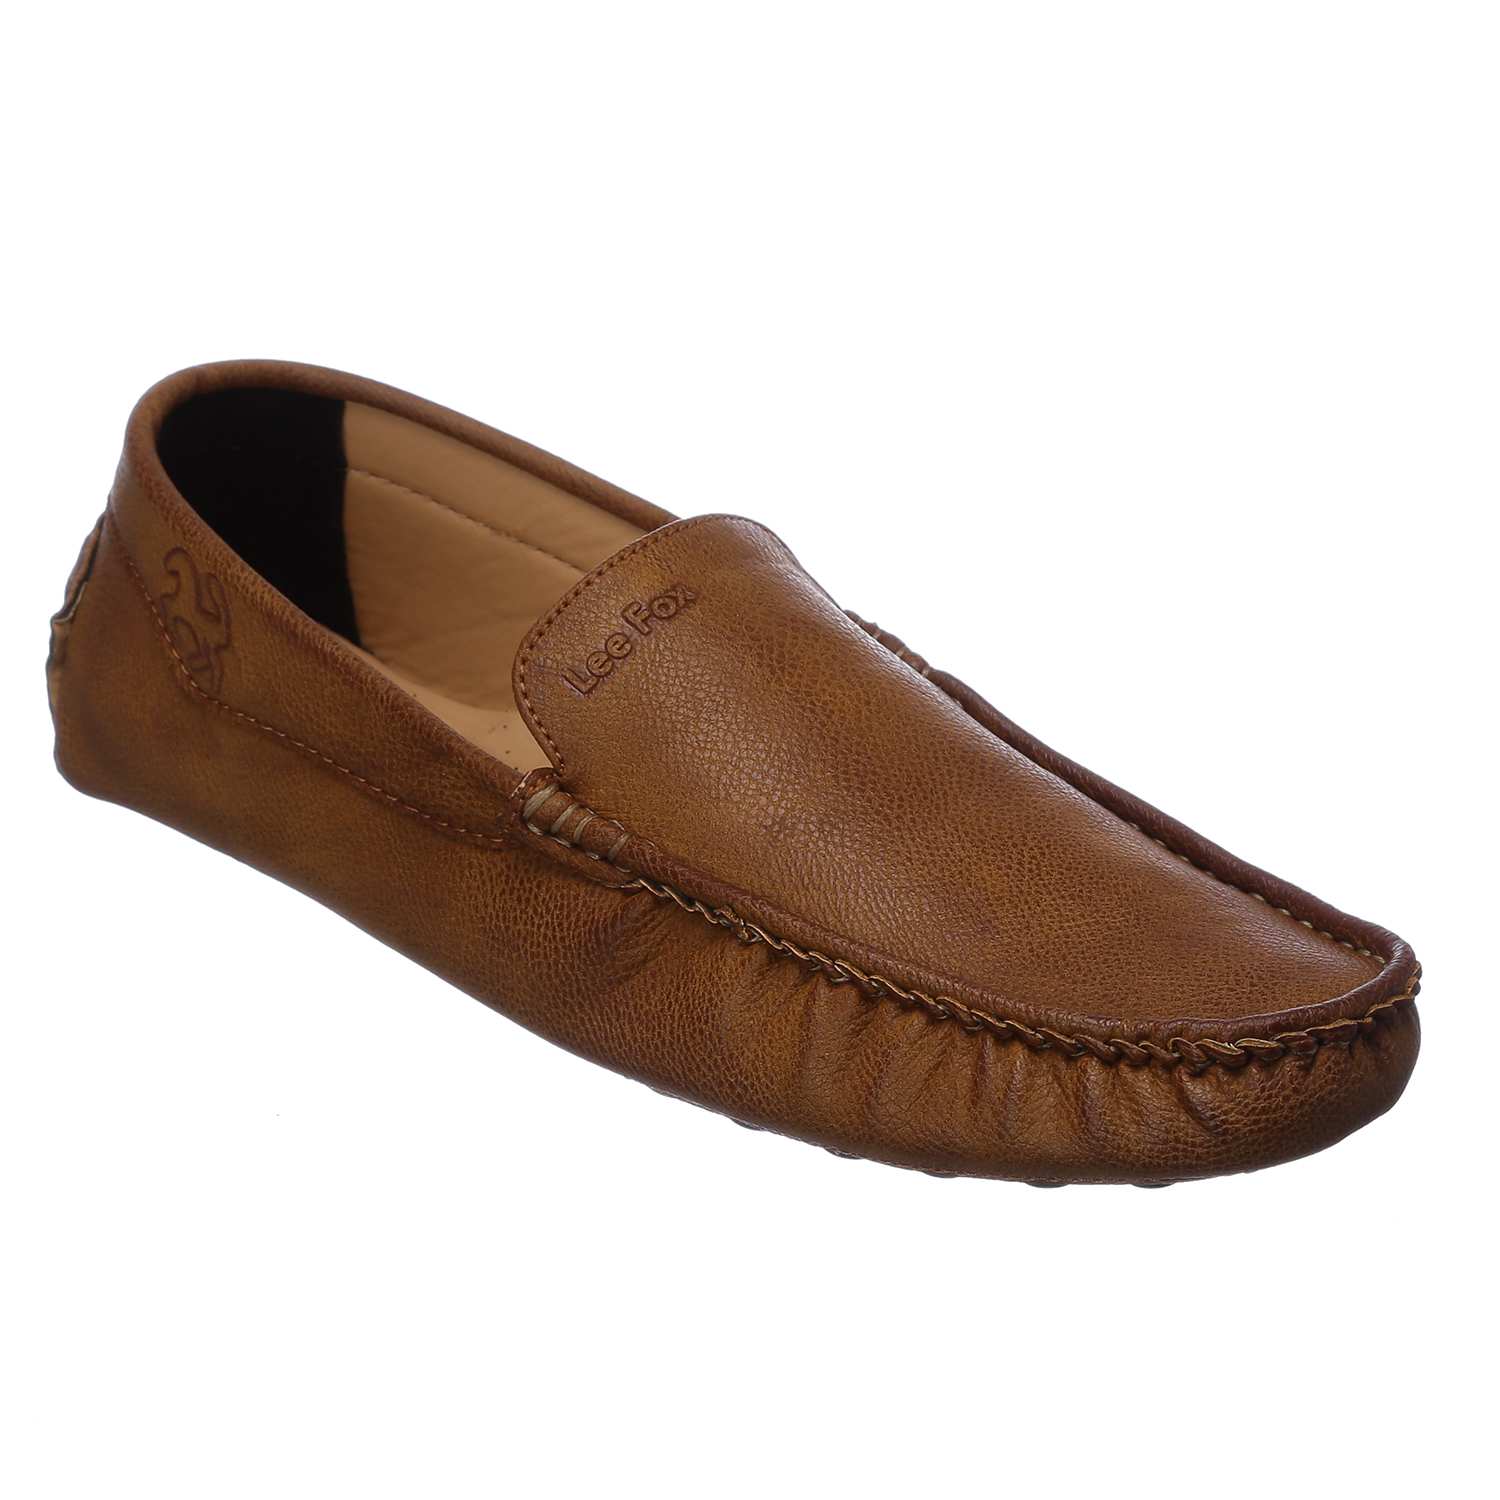 Buy Lee Fox Loafer For Men Tan Colour Online @ ₹1199 from ShopClues